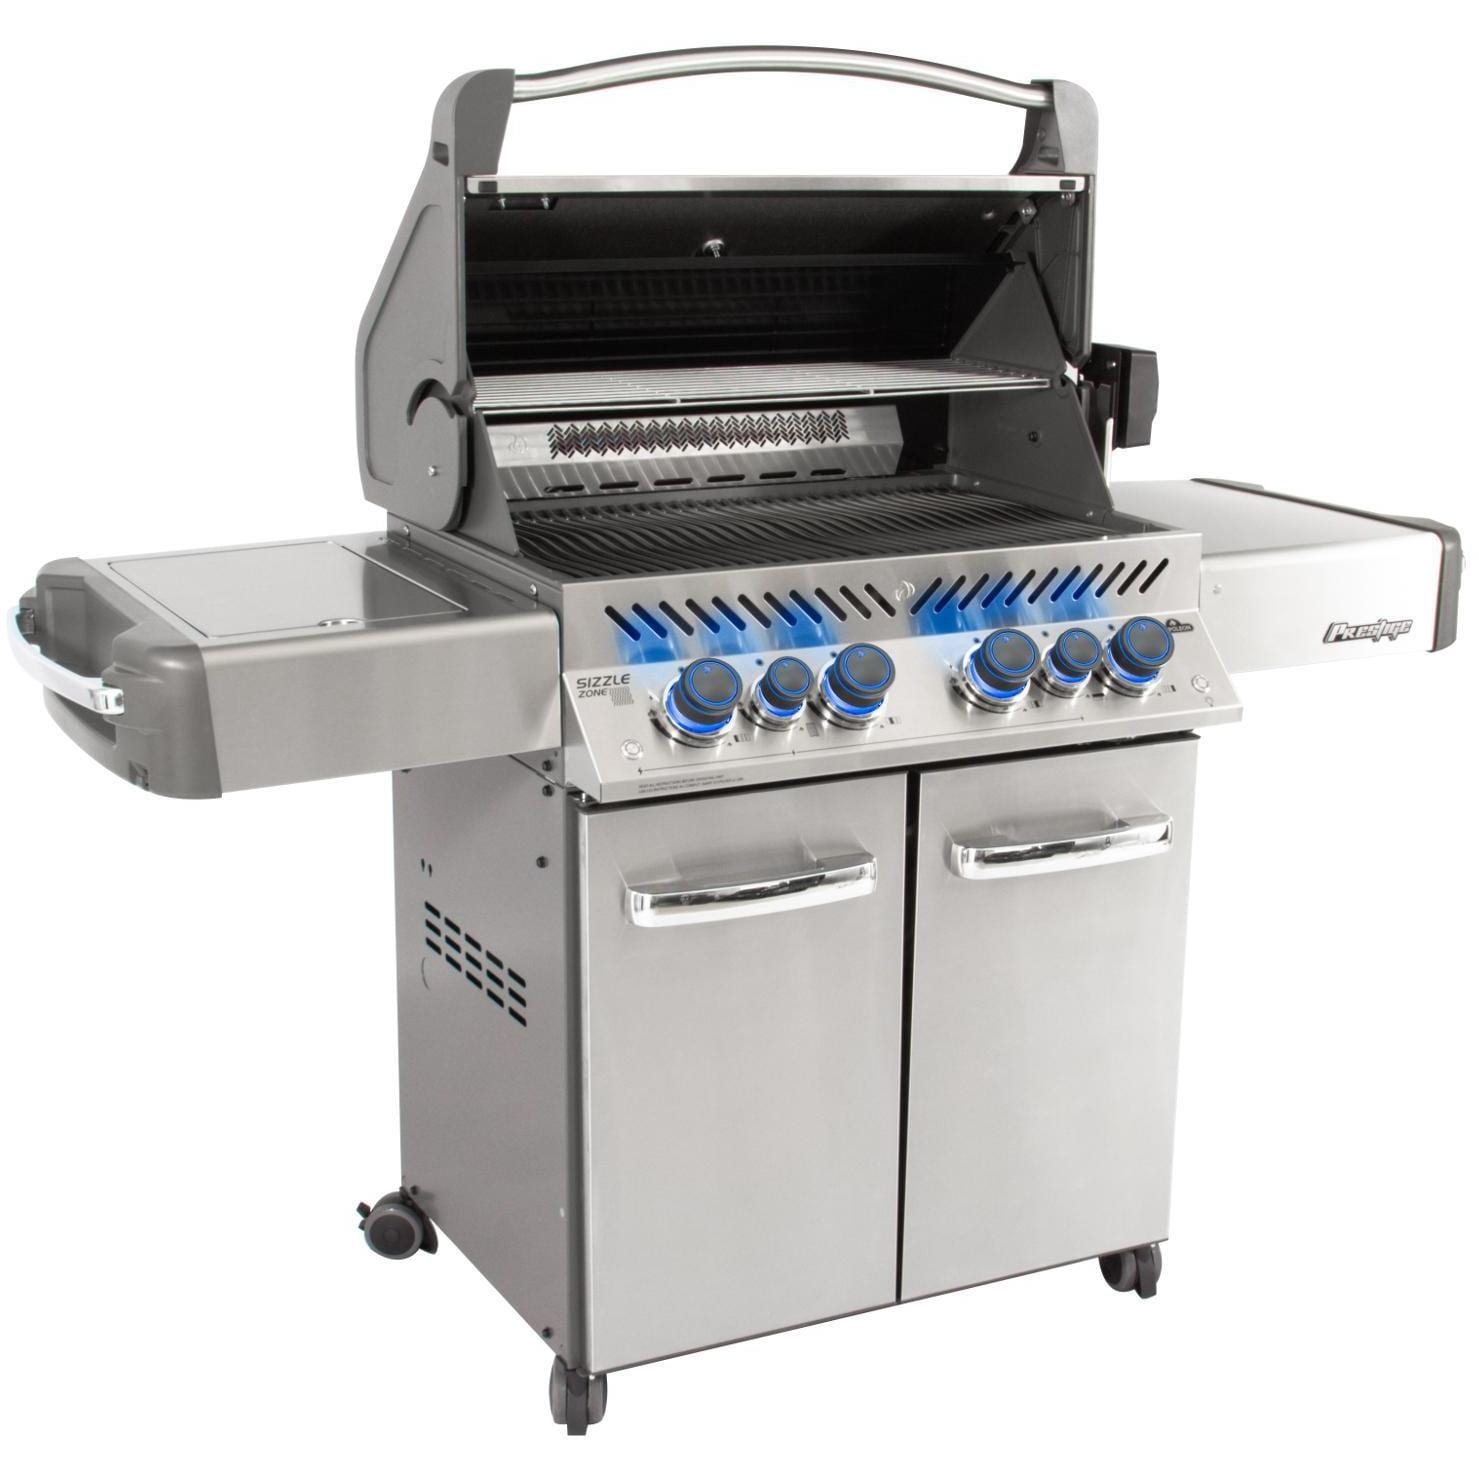 Napoleon Prestige 500 Propane Gas Grill With Infrared Rear Burner And Infrared Side Burner - image 2 of 6